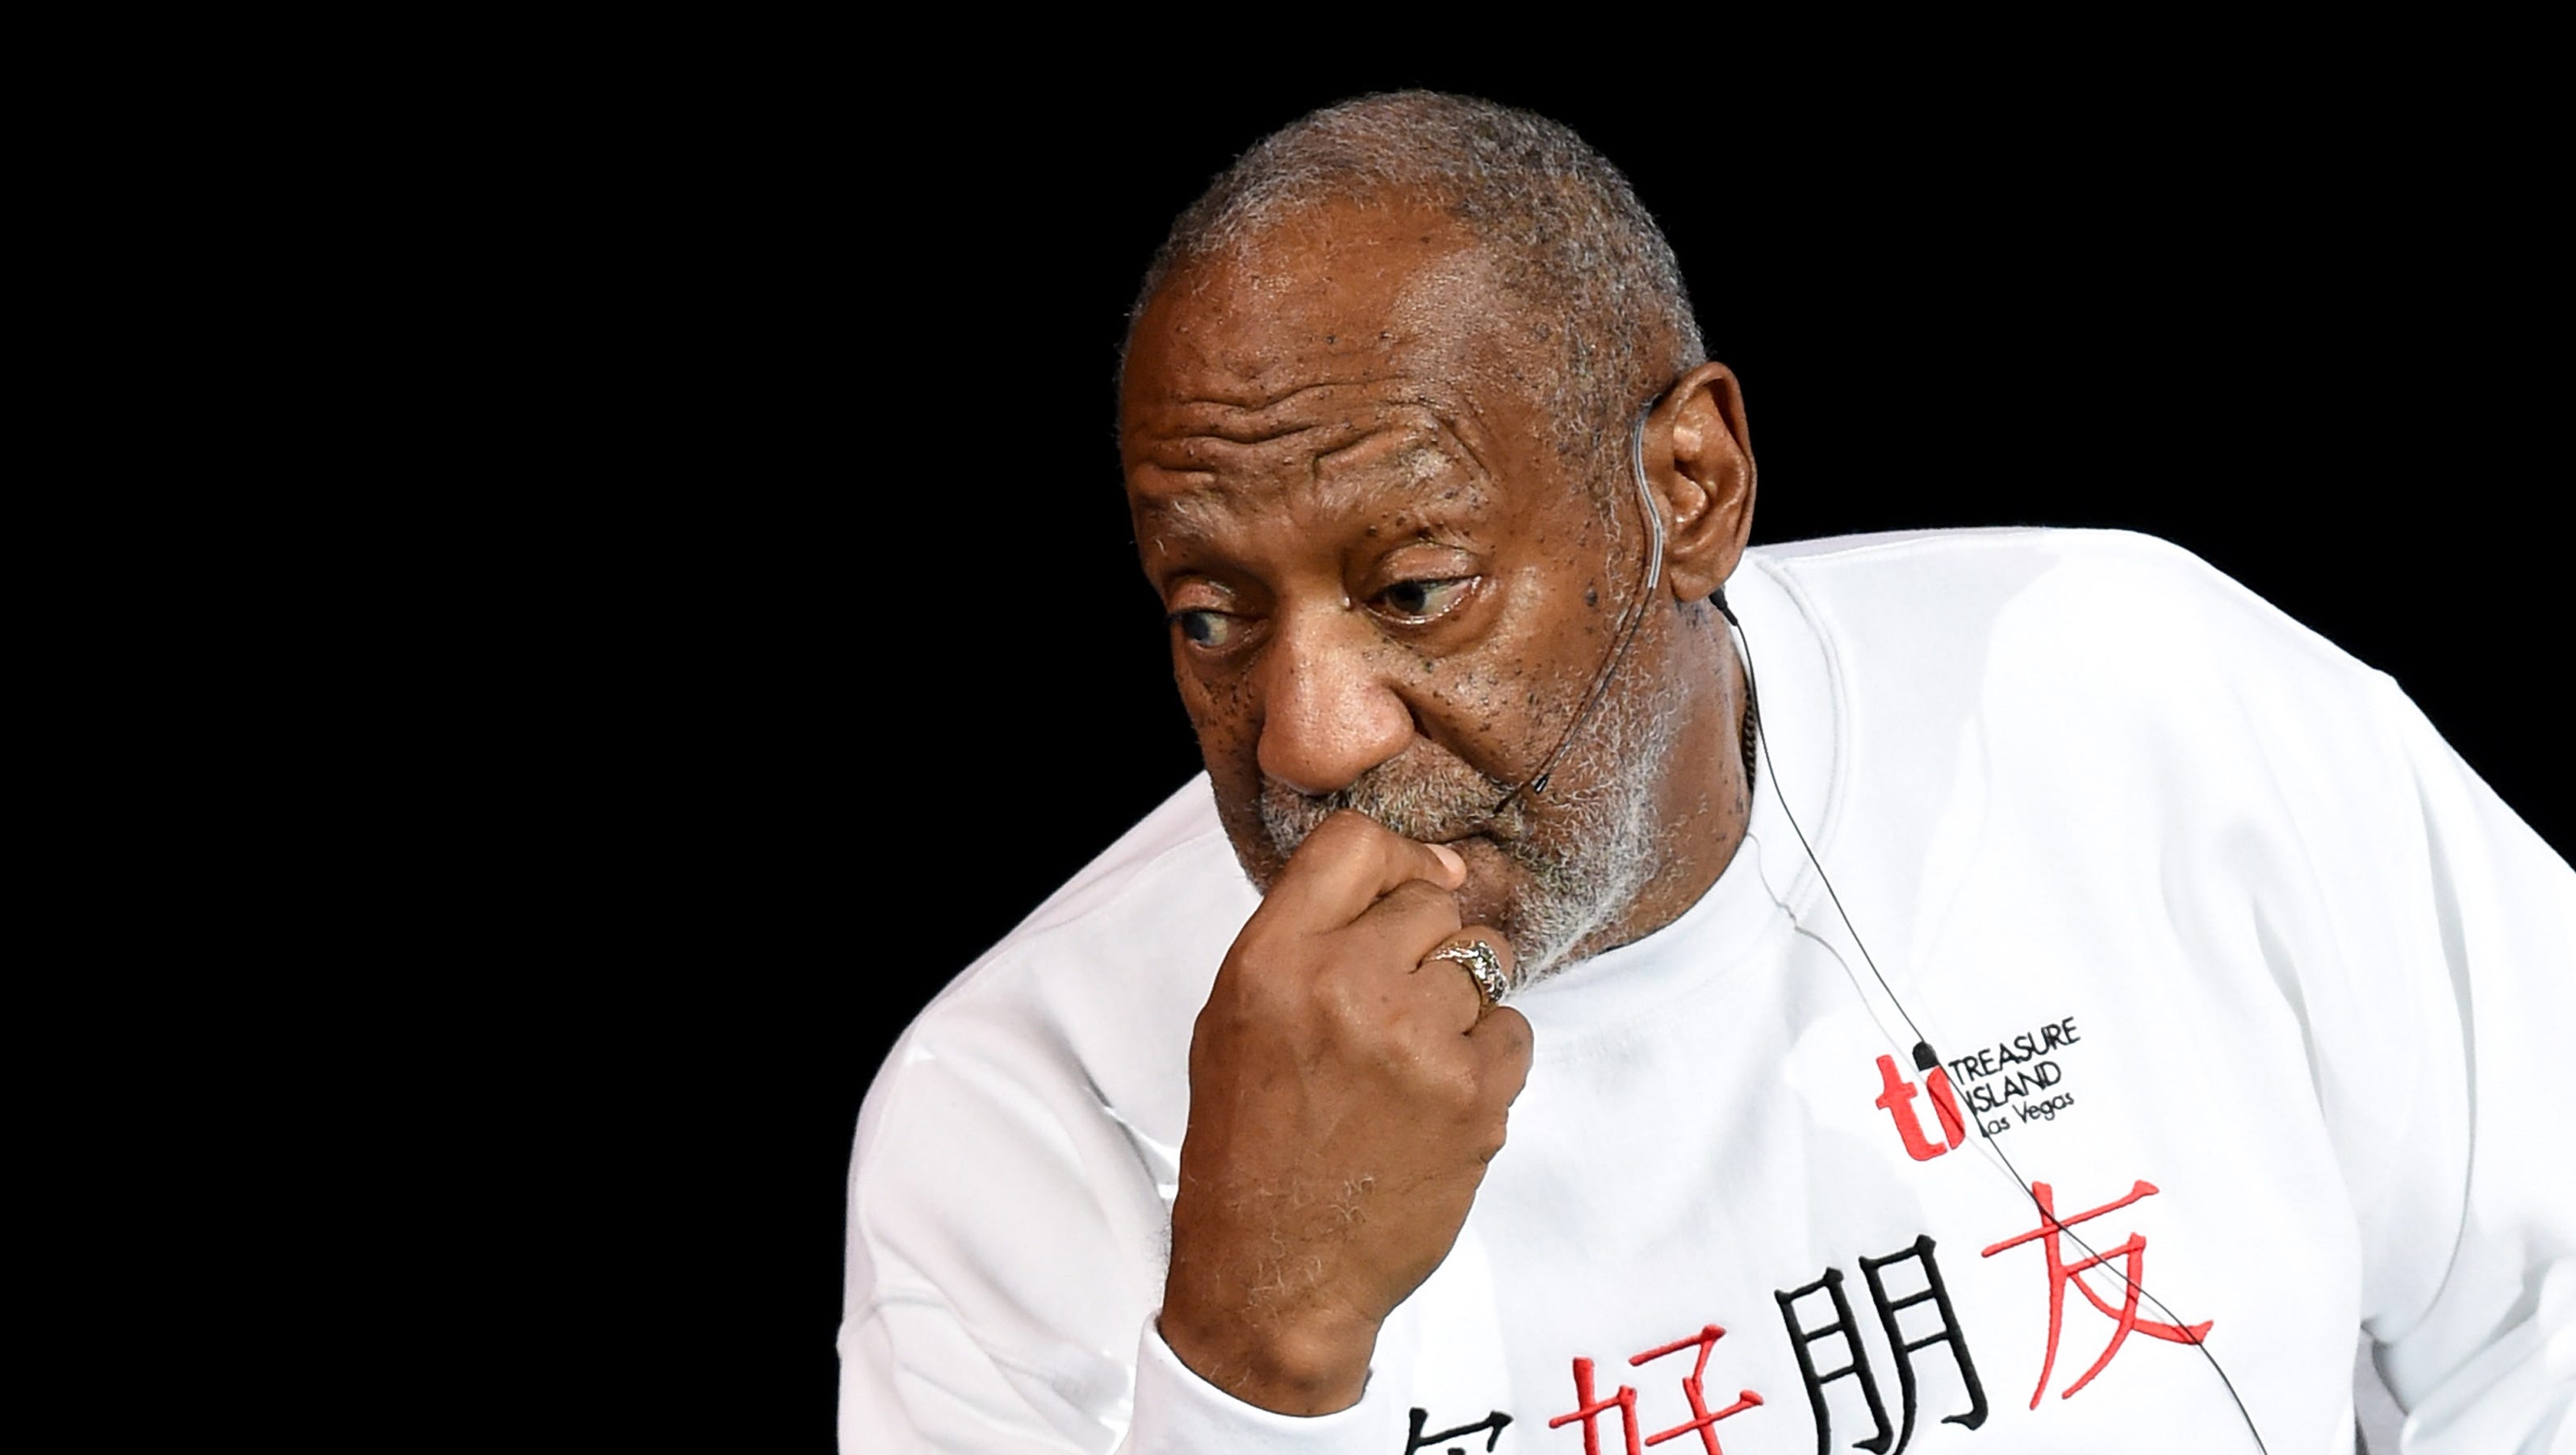 Bill Cosby show in Massachusetts canceled - USA TODAY